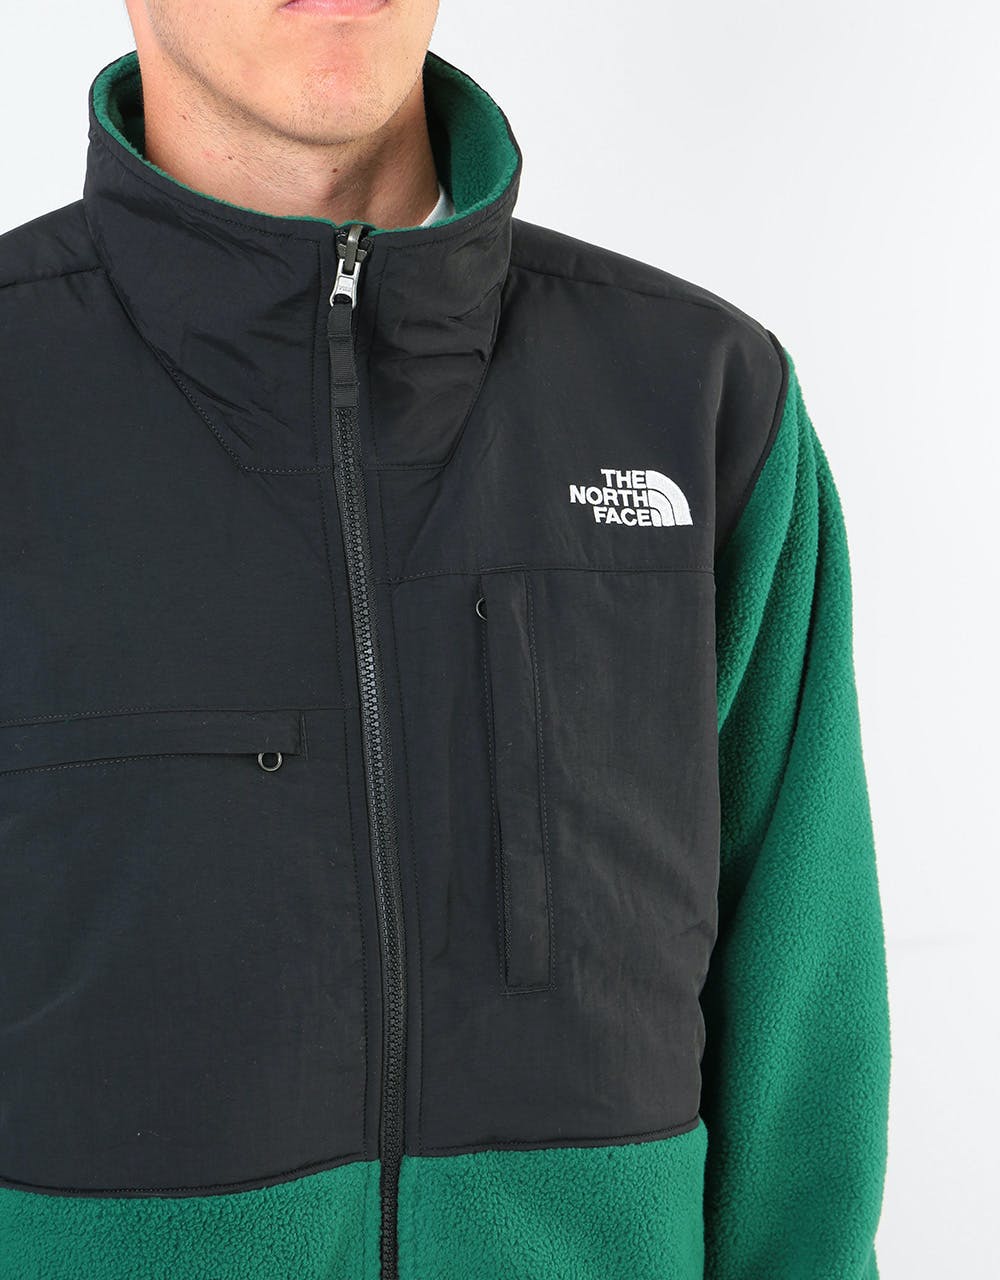 The North Face Denali Jacket 2 - Night Green – Route One